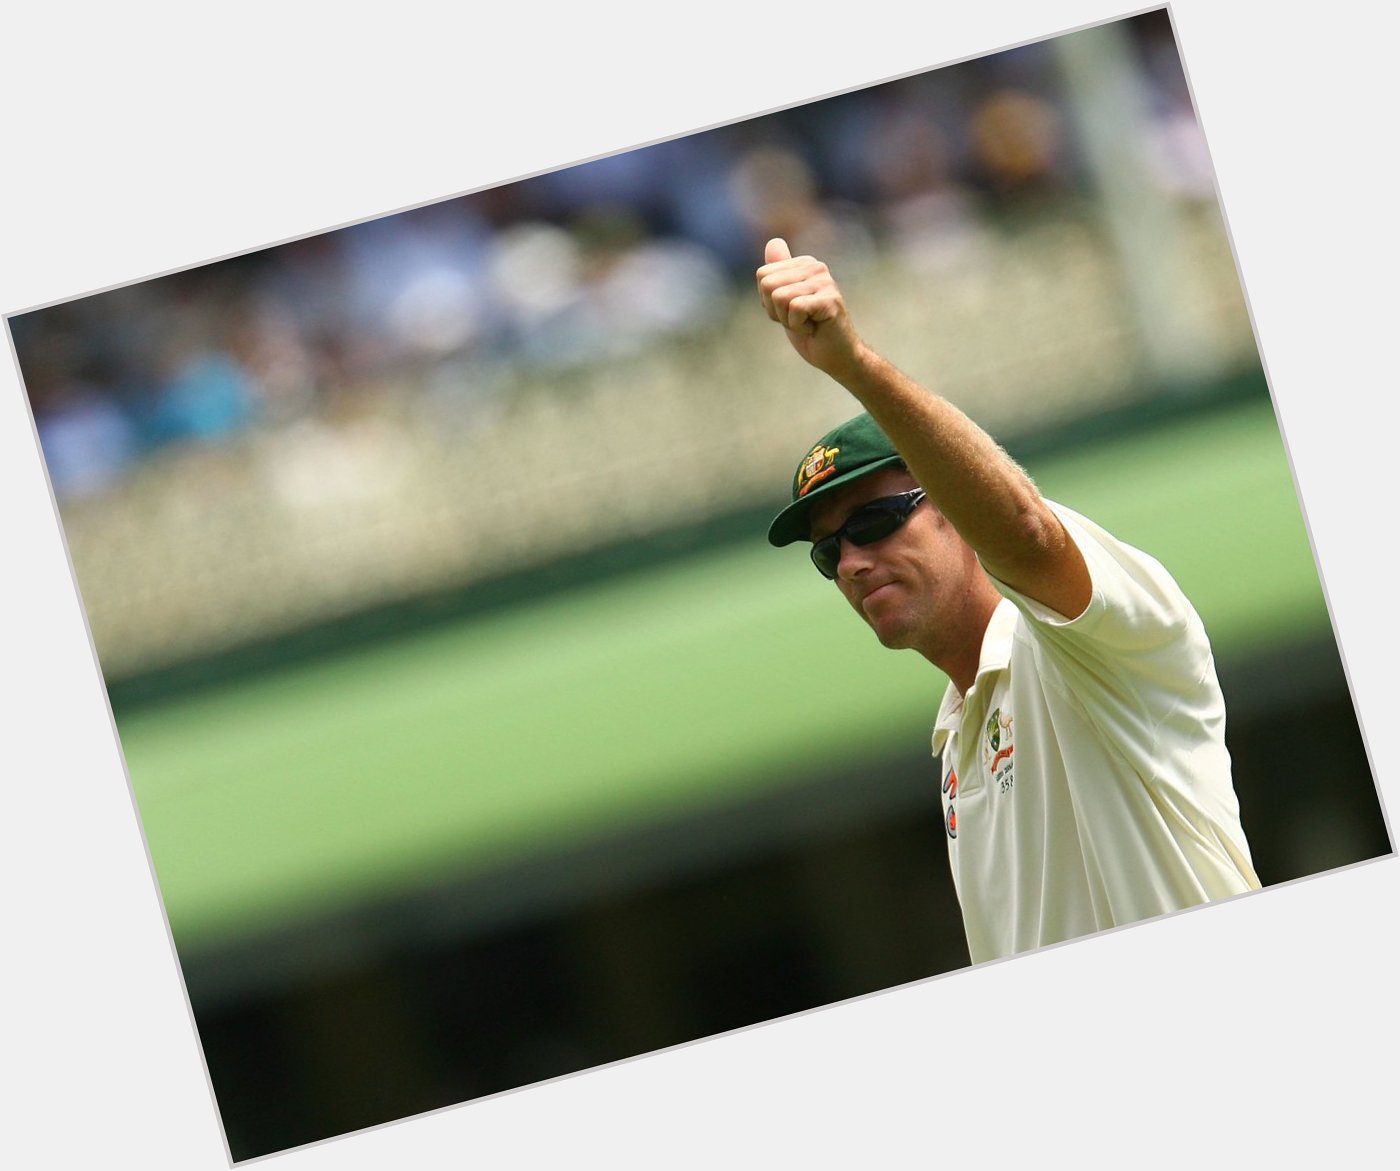 Happy birthday to Aussies Glenn McGrath - Most Test wickets by a fast bowler (567) & Most wickets in (71) 